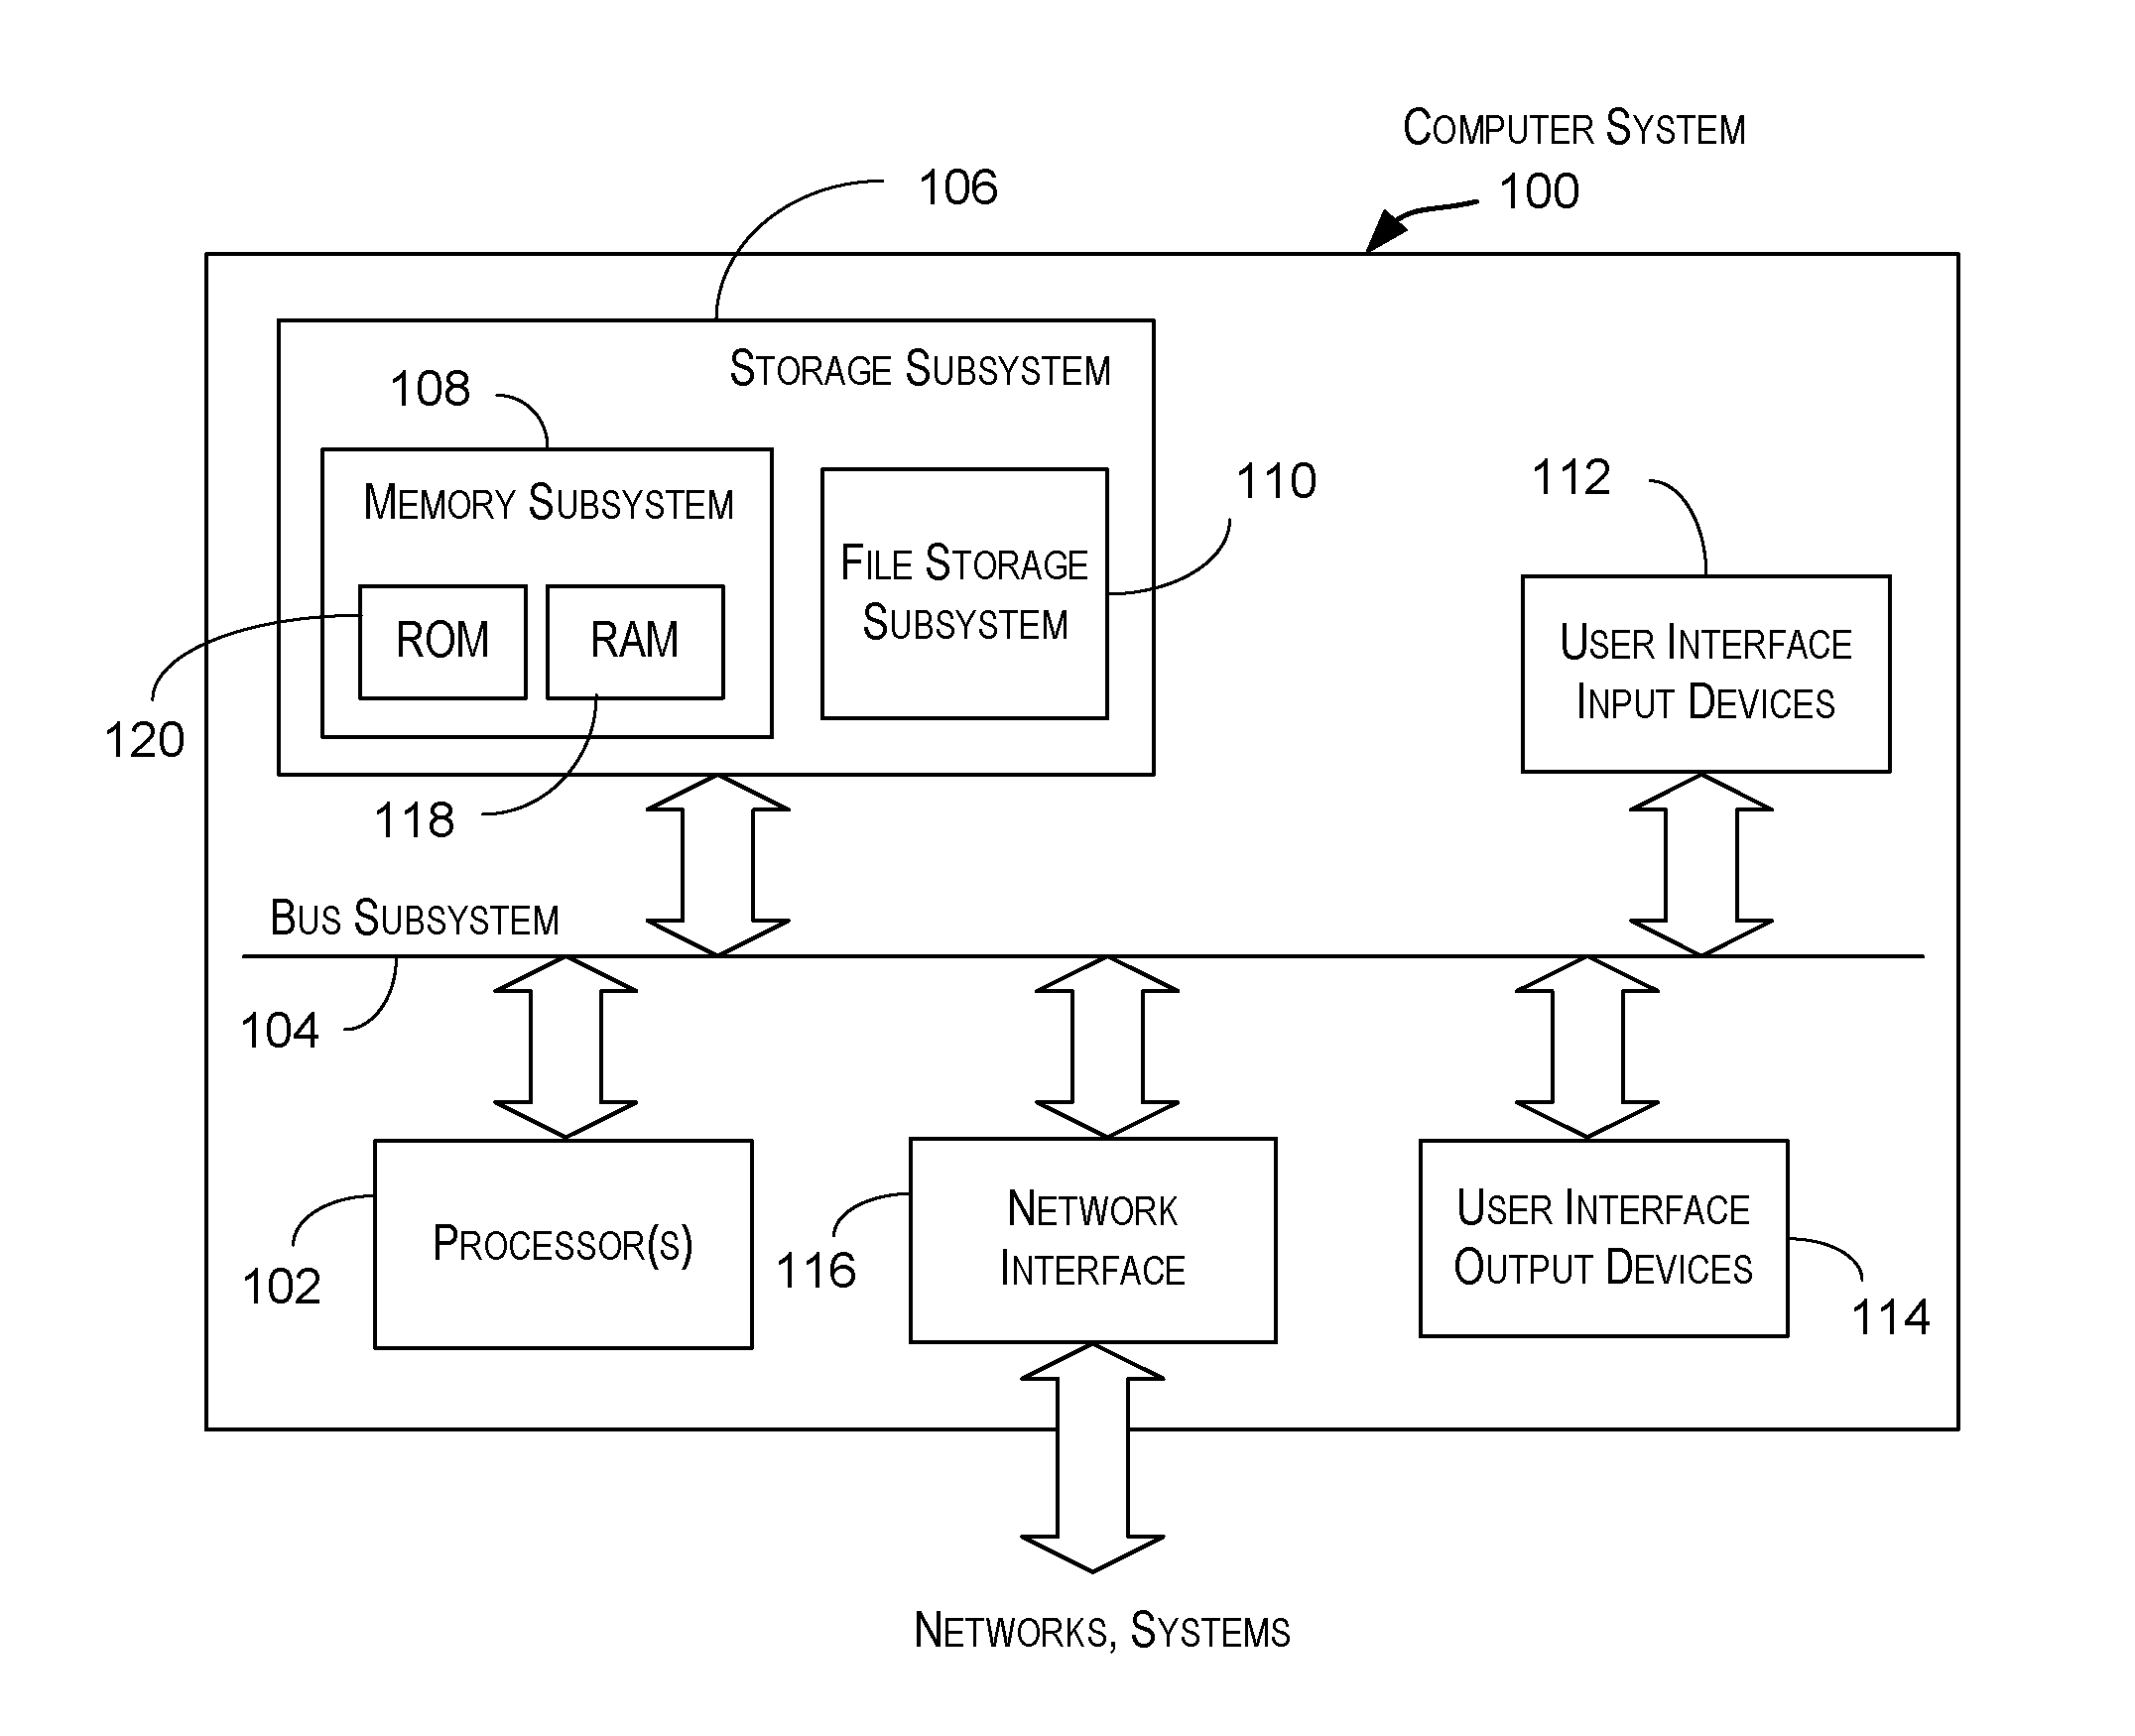 Method and System for Producing and Organizing Electronically Stored Information